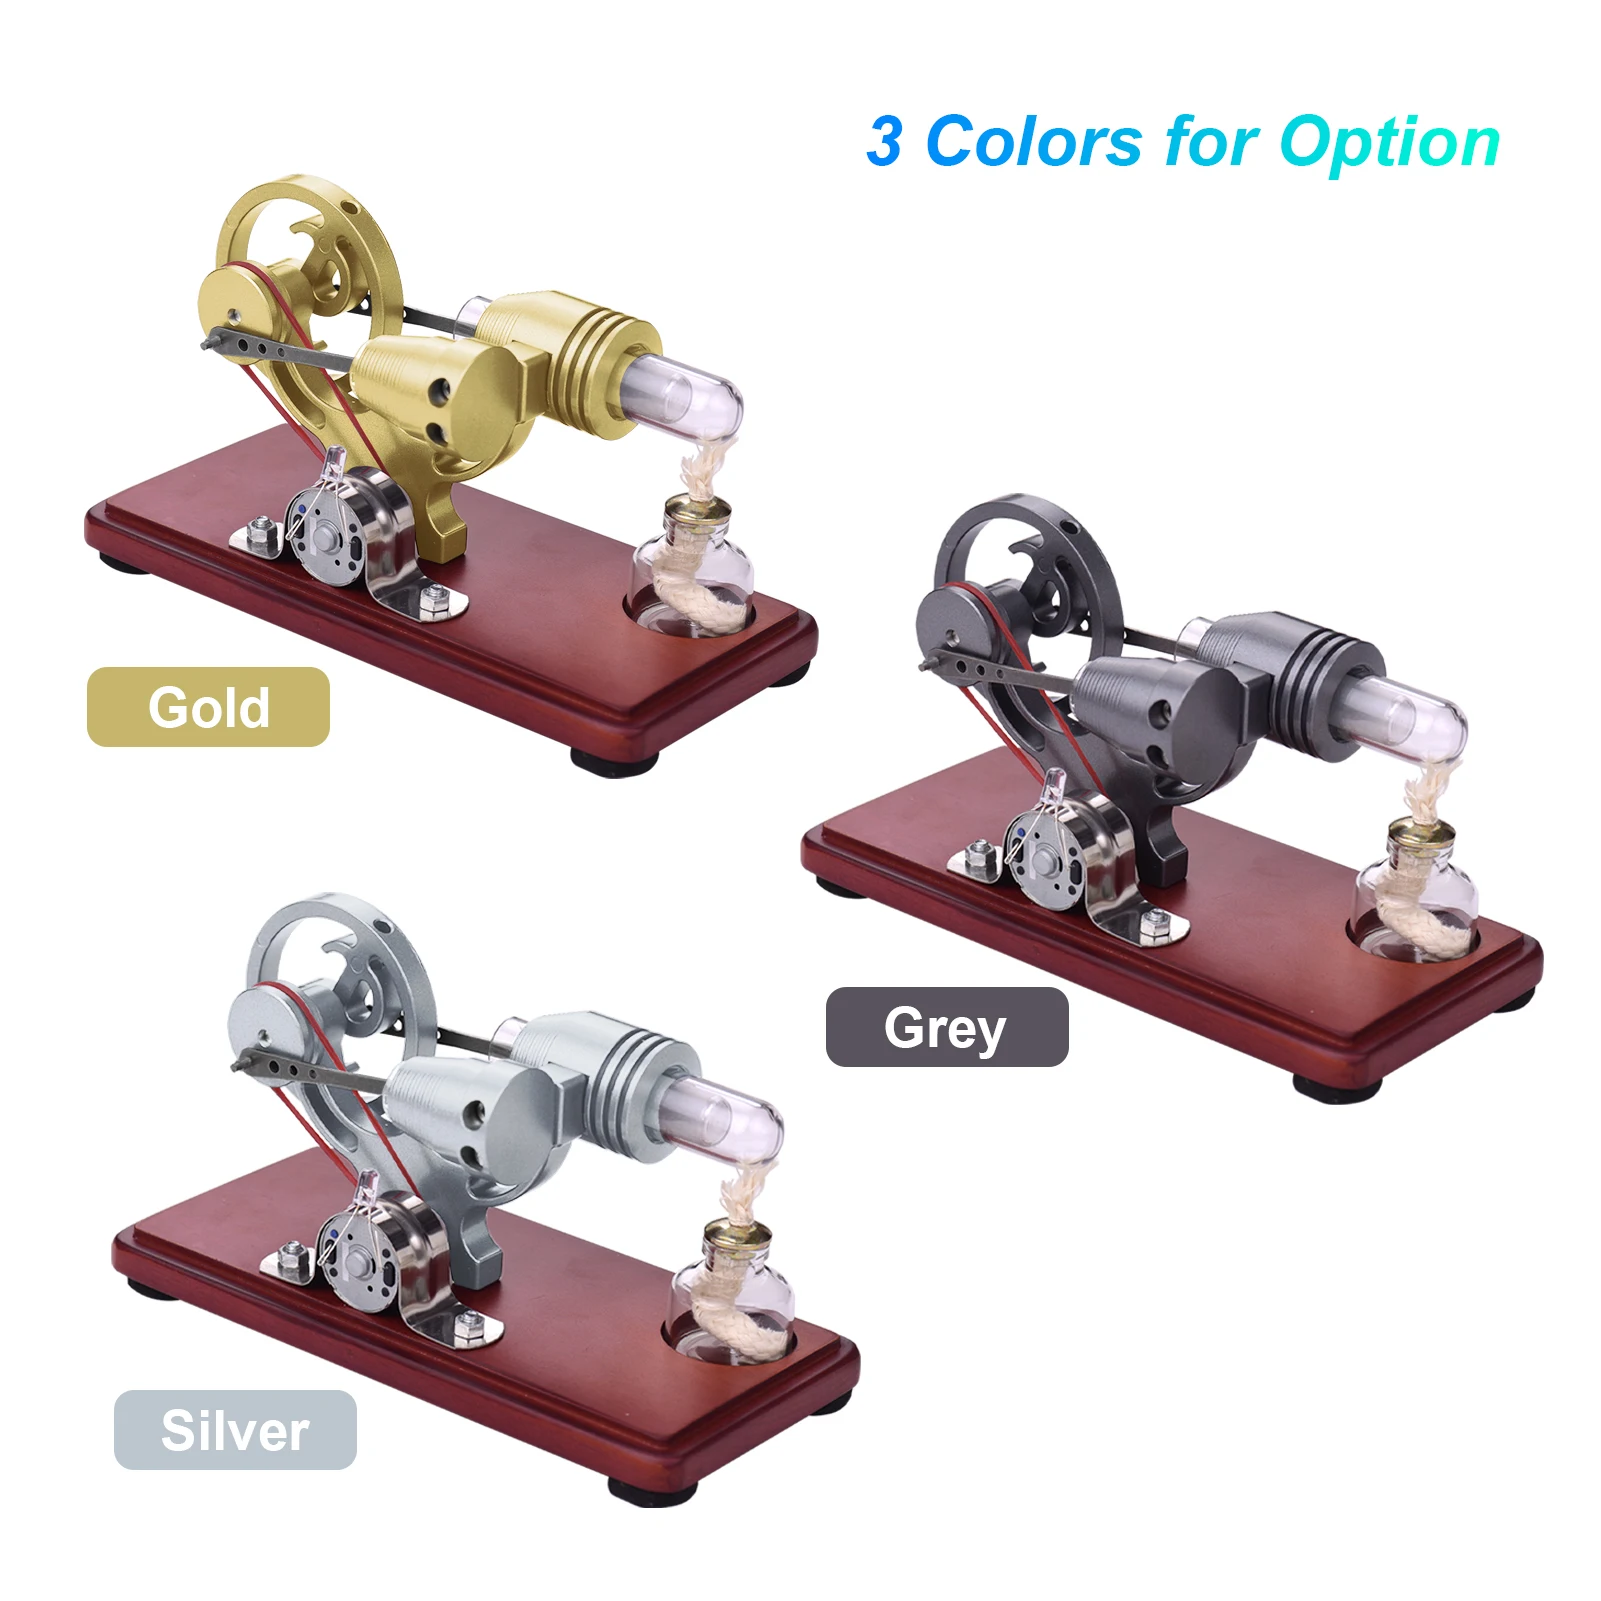 Retro Style Hot Air Stirling Engine Motor Model Dollar Flywheel Design Educational Toy Electricity Generator forced air cooled smoldering vacuum stirling engine send friends birthday gift metal model creative products